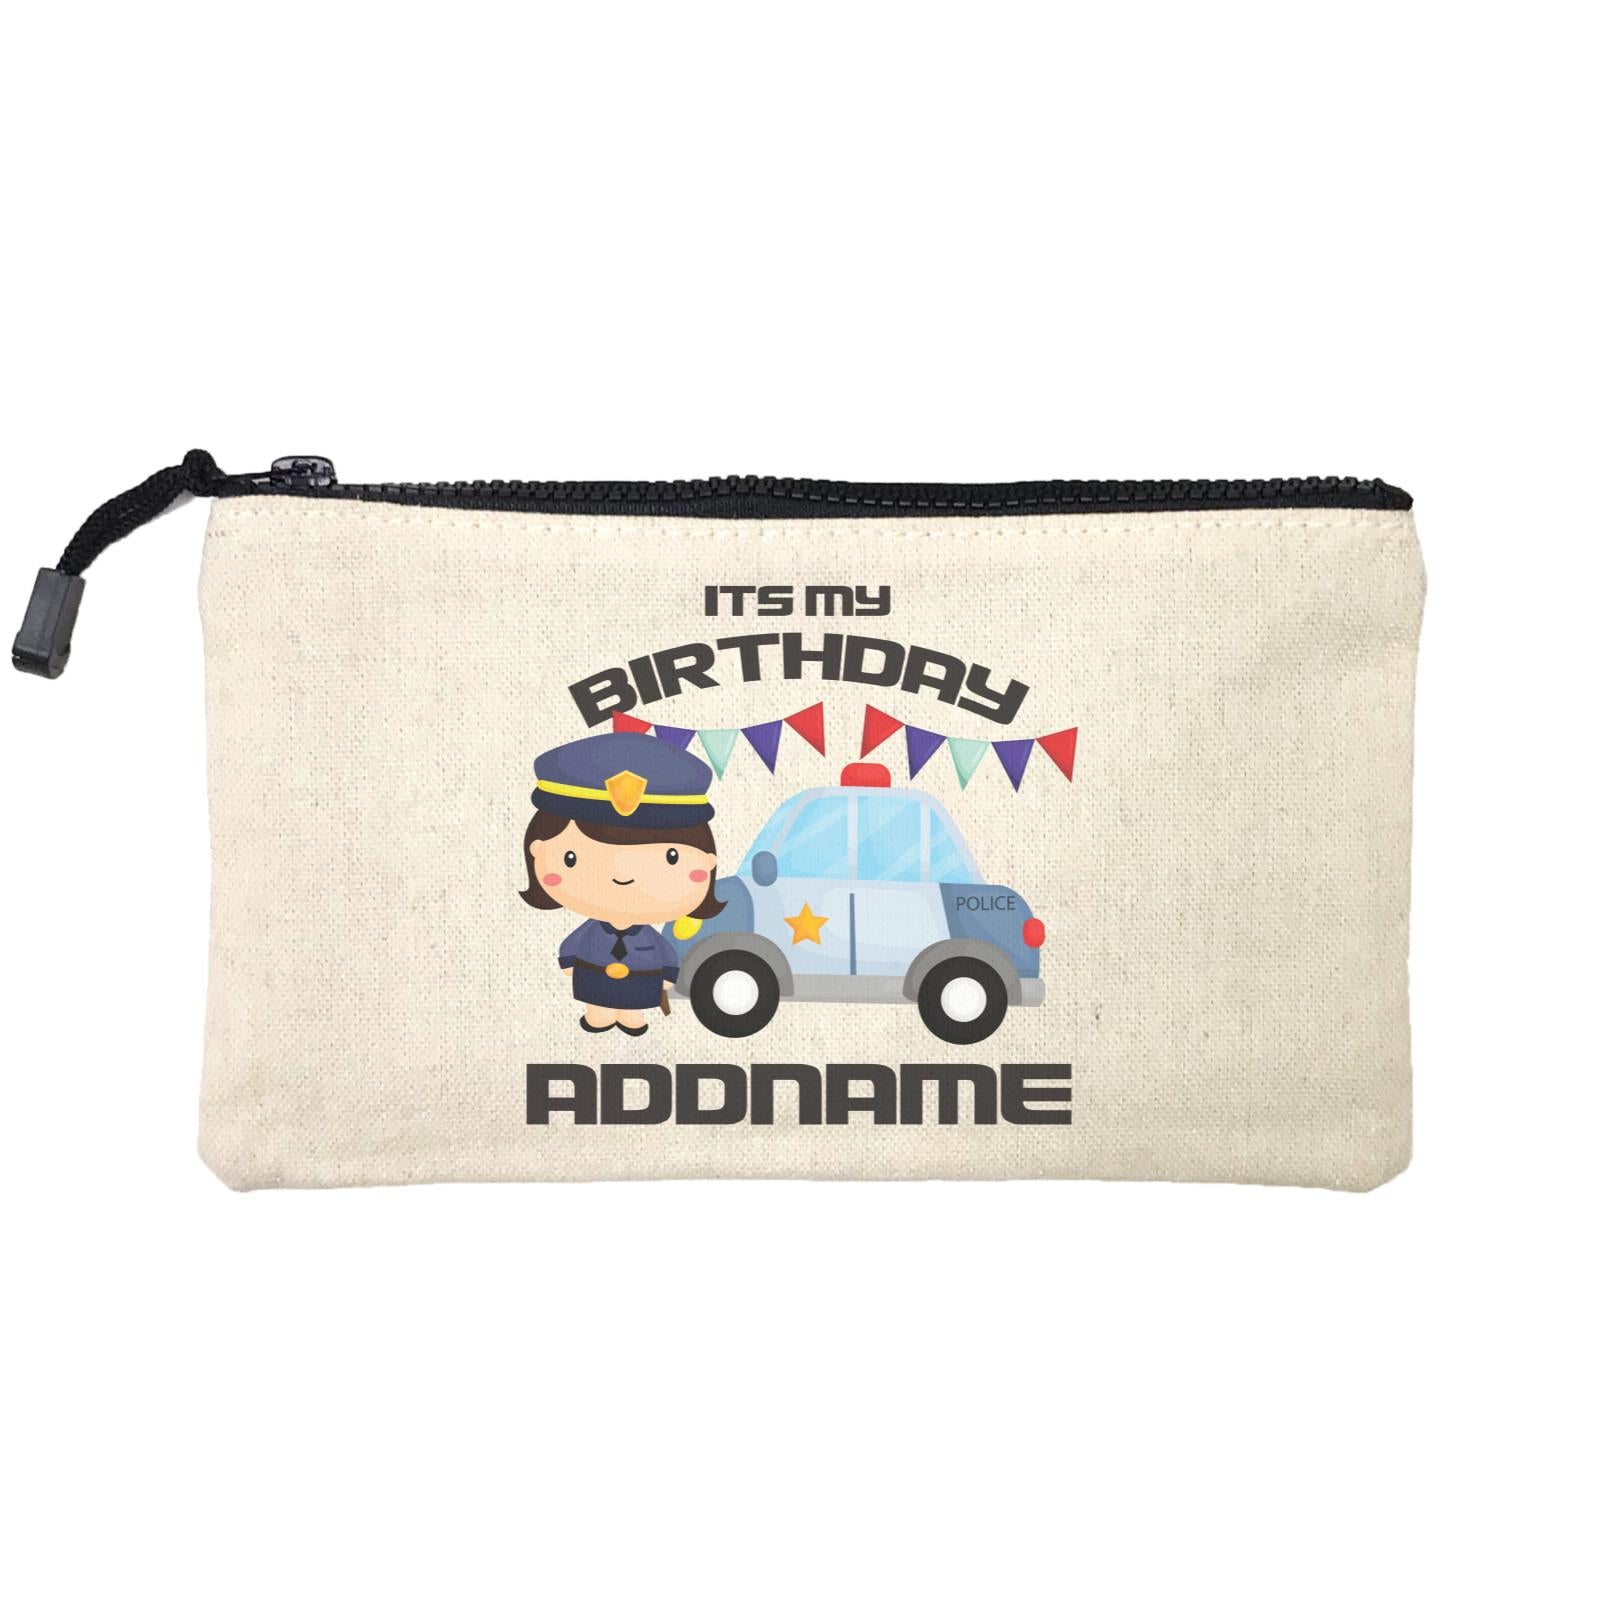 Birthday Police Officer Girl In Suit With Police Car Its My Birthday Addname Mini Accessories Stationery Pouch